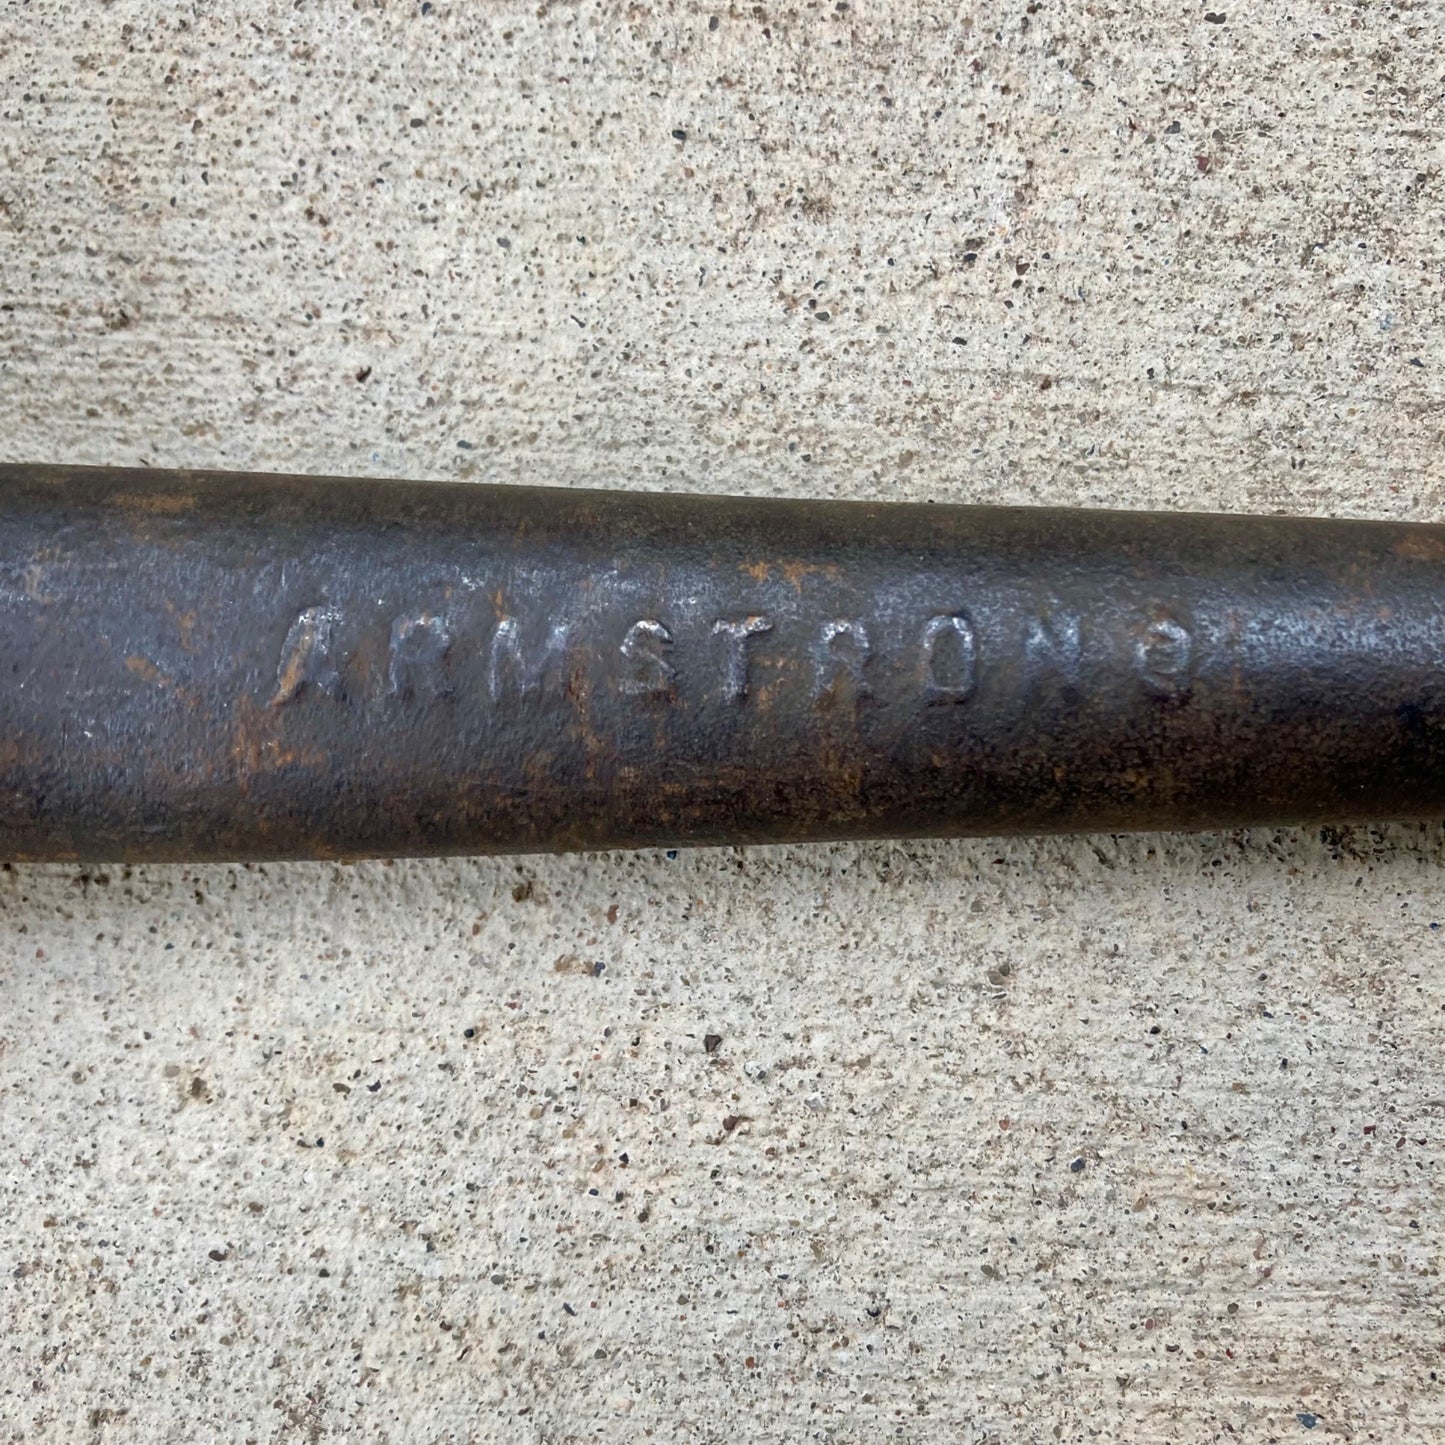 Vintage Armstrong 1-1/2" Spud Wrench Offset 1.5 Open End